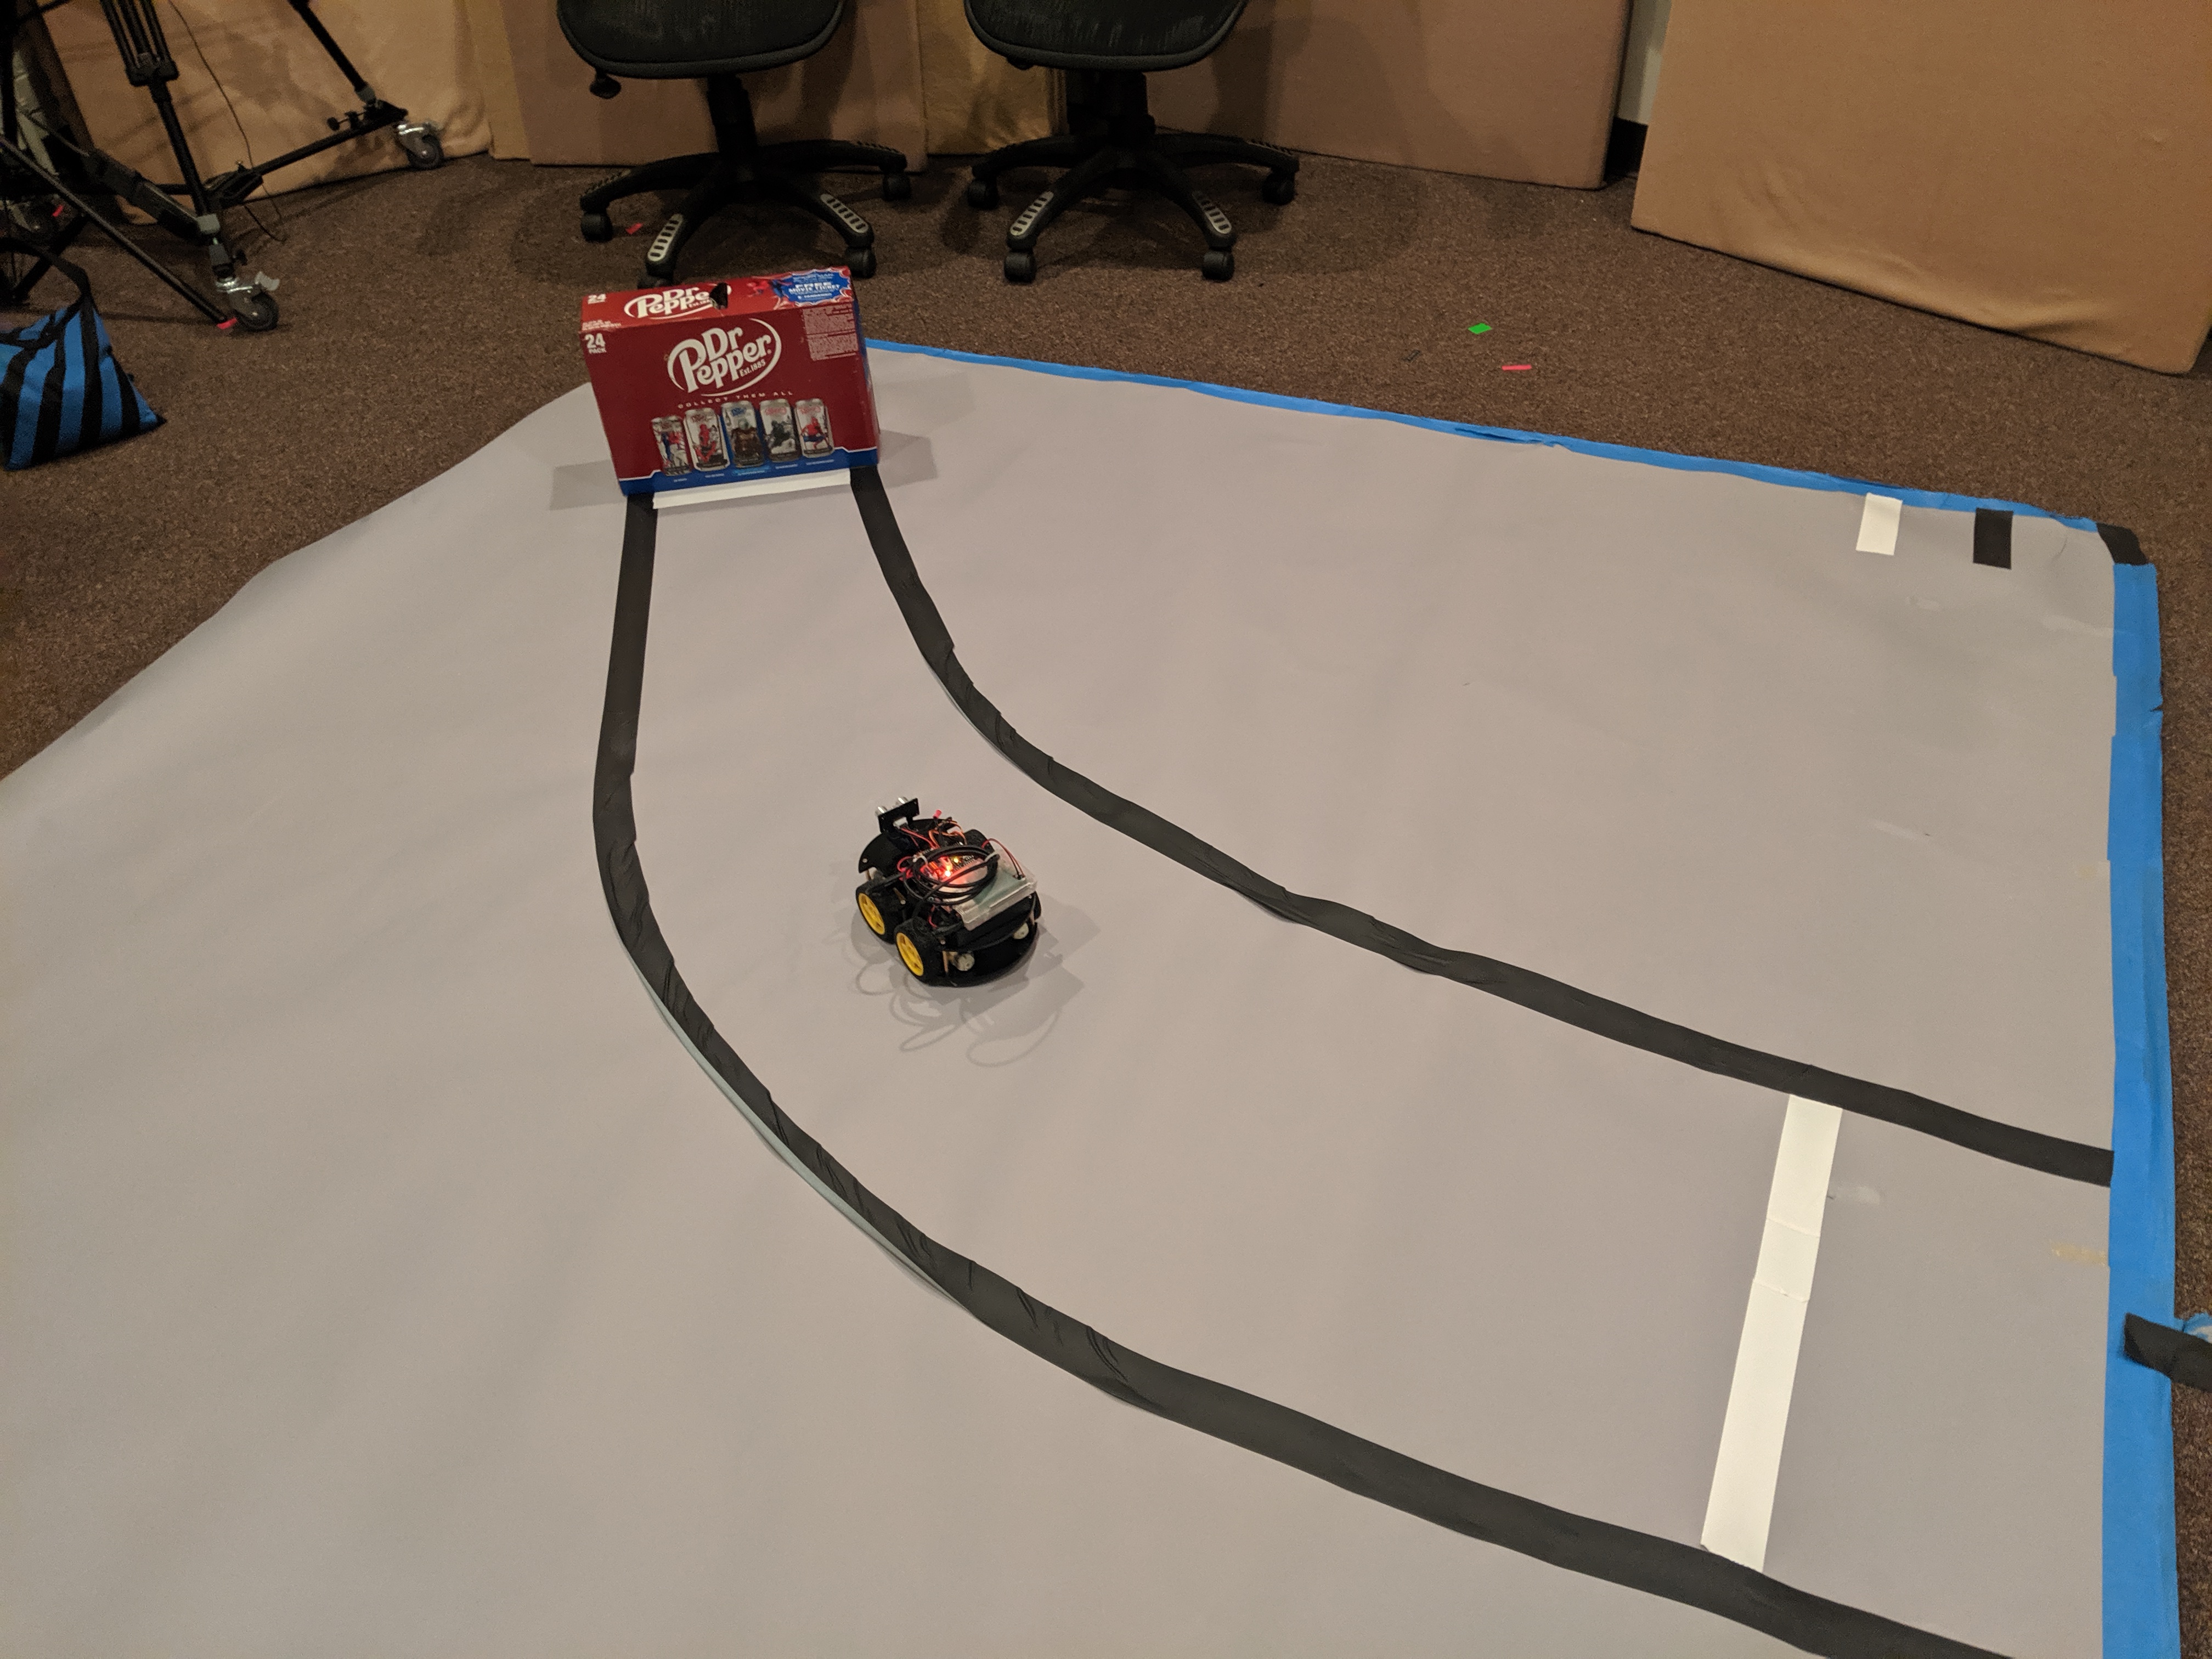 The robot car is centered between the black tape guides as it follows a curved path toward the finish line